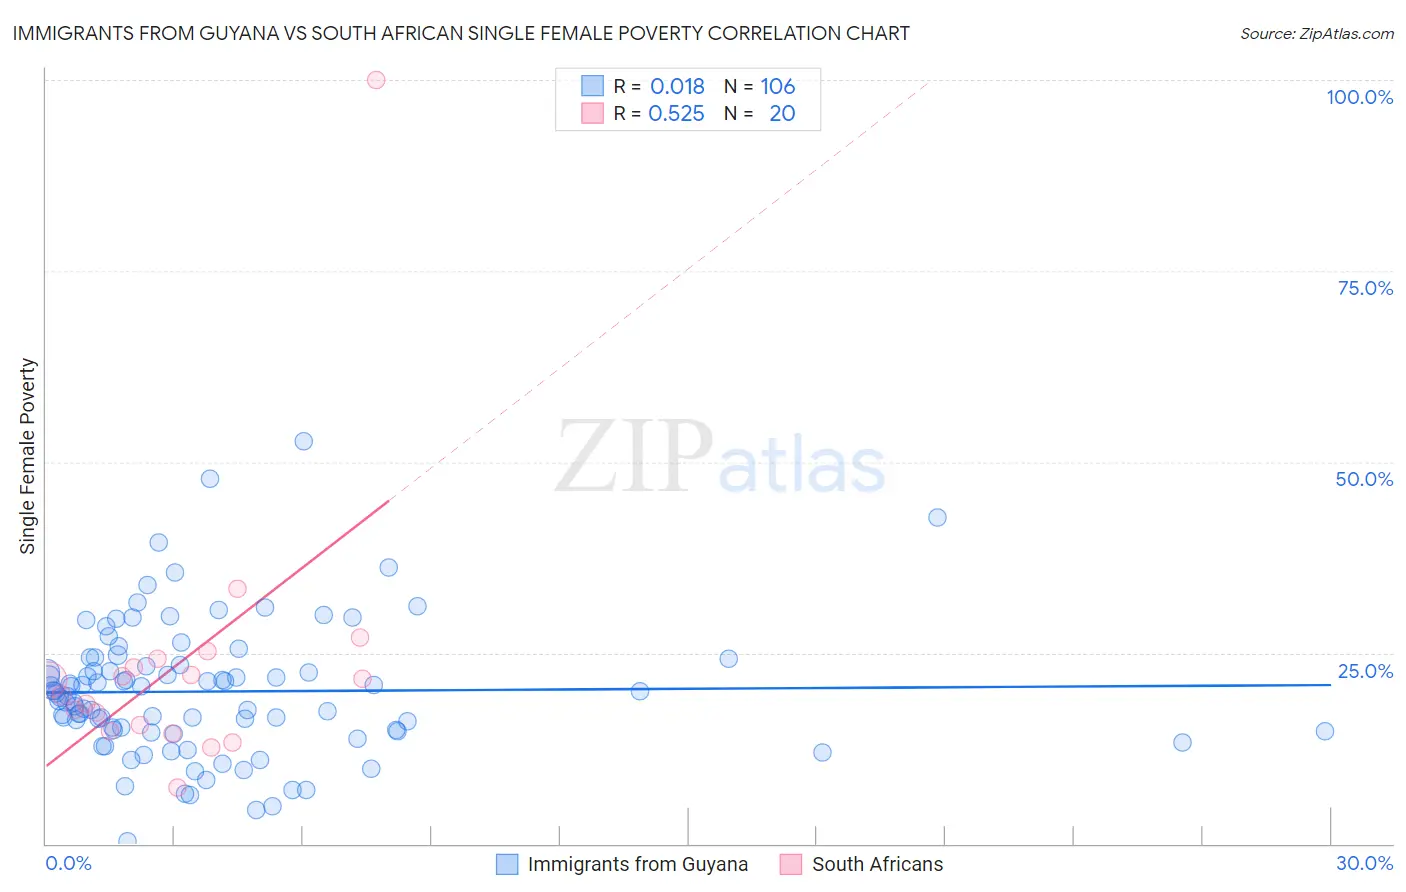 Immigrants from Guyana vs South African Single Female Poverty